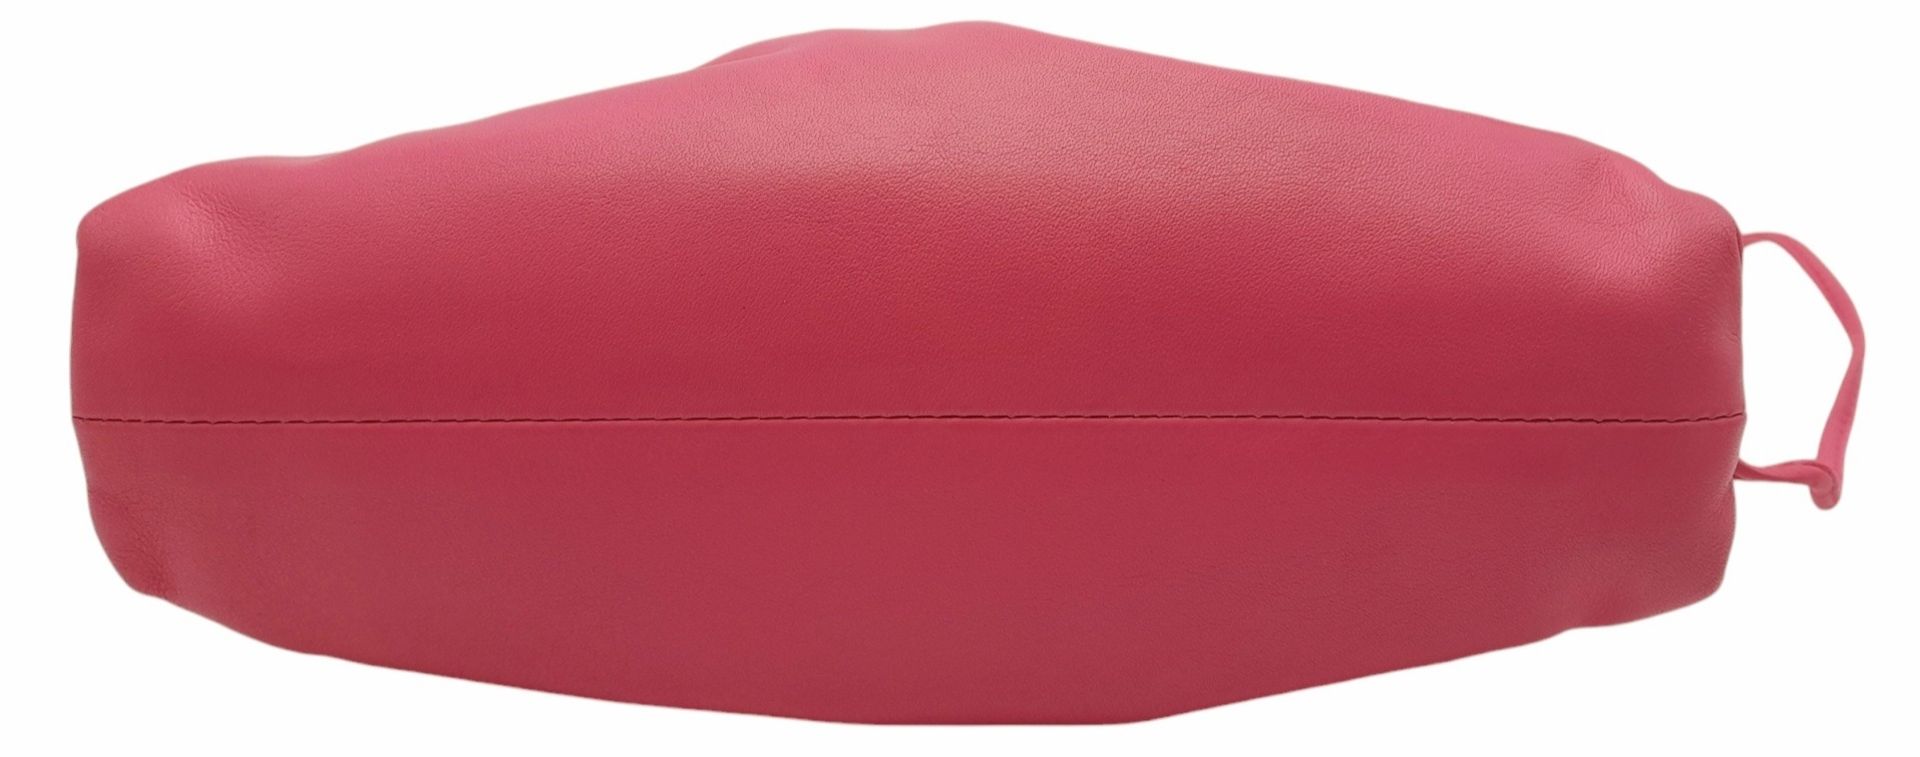 A Bottega Veneta Pink Mini Pouch Bag. Leather exterior with thin strap and magnetic closure. Pink - Bild 3 aus 9